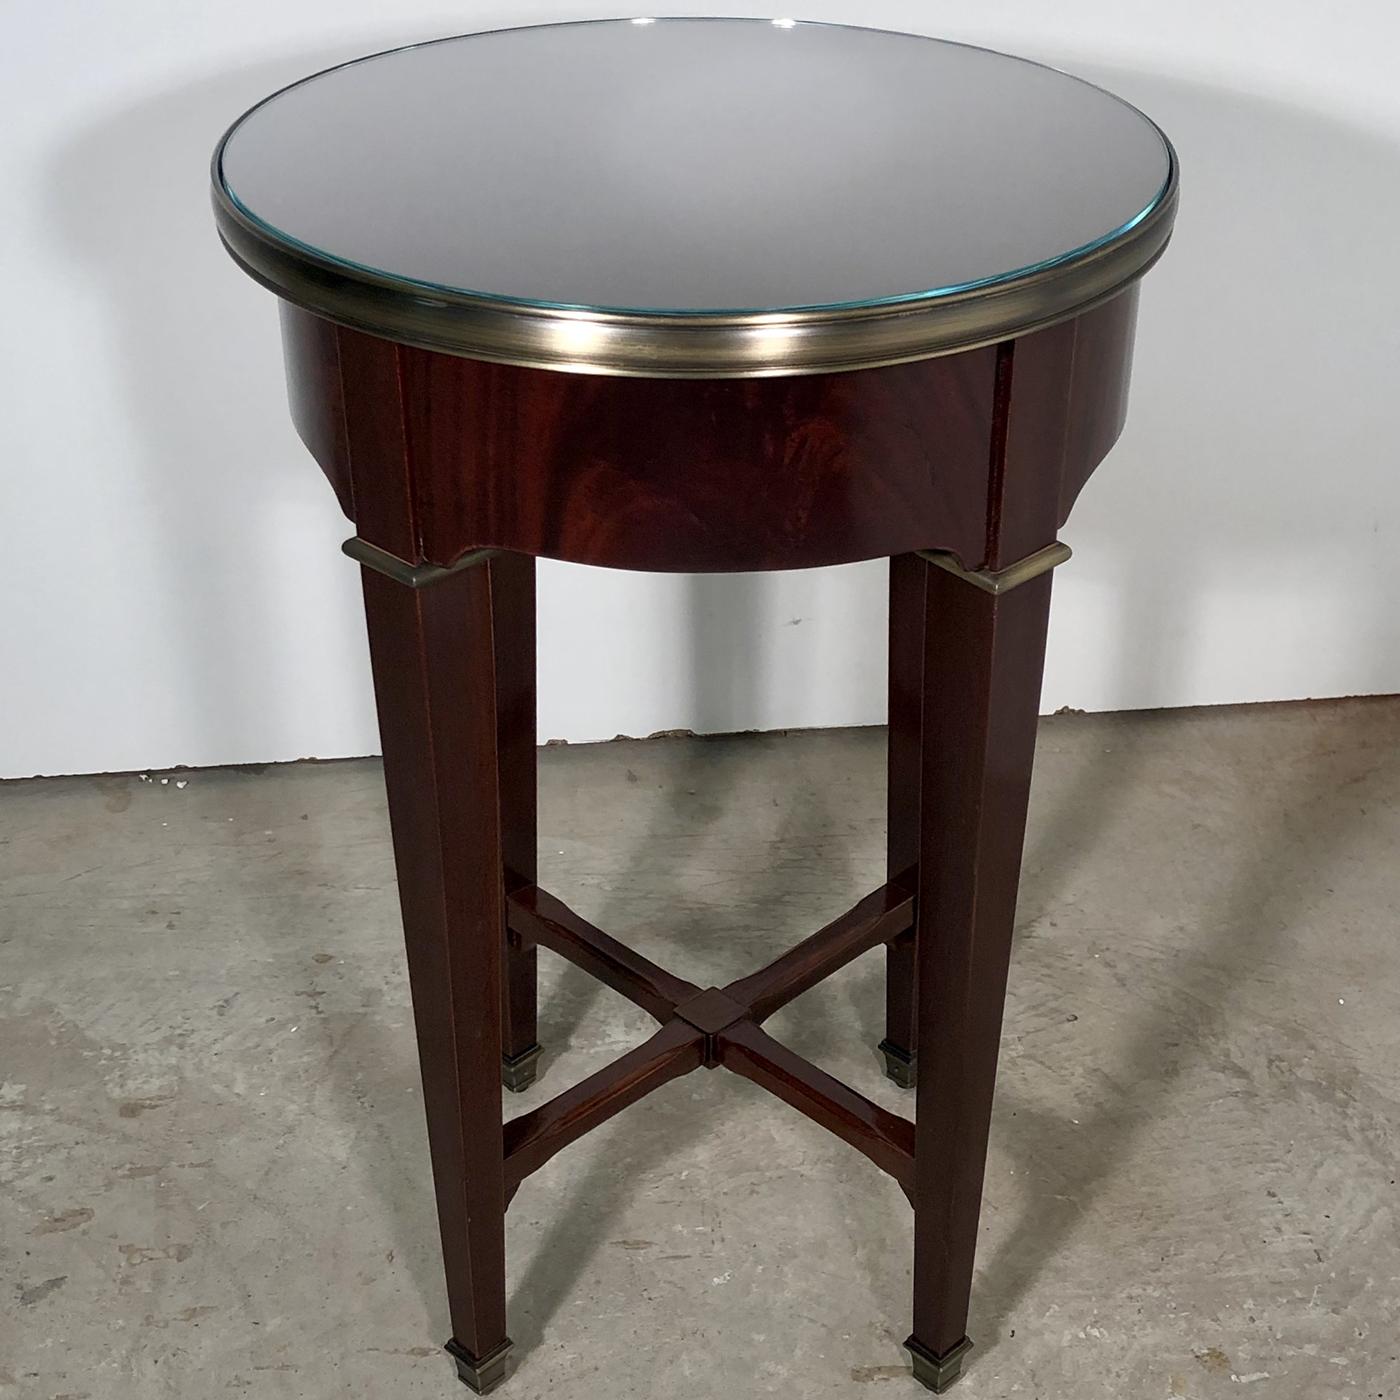 This stunning side table brings style and flair to any traditional living room, boasting tapered legs and a decorative cross base. Beautifully crafted from solid mahogany with a rich brown tone, this round table is enhanced with brass accents with a